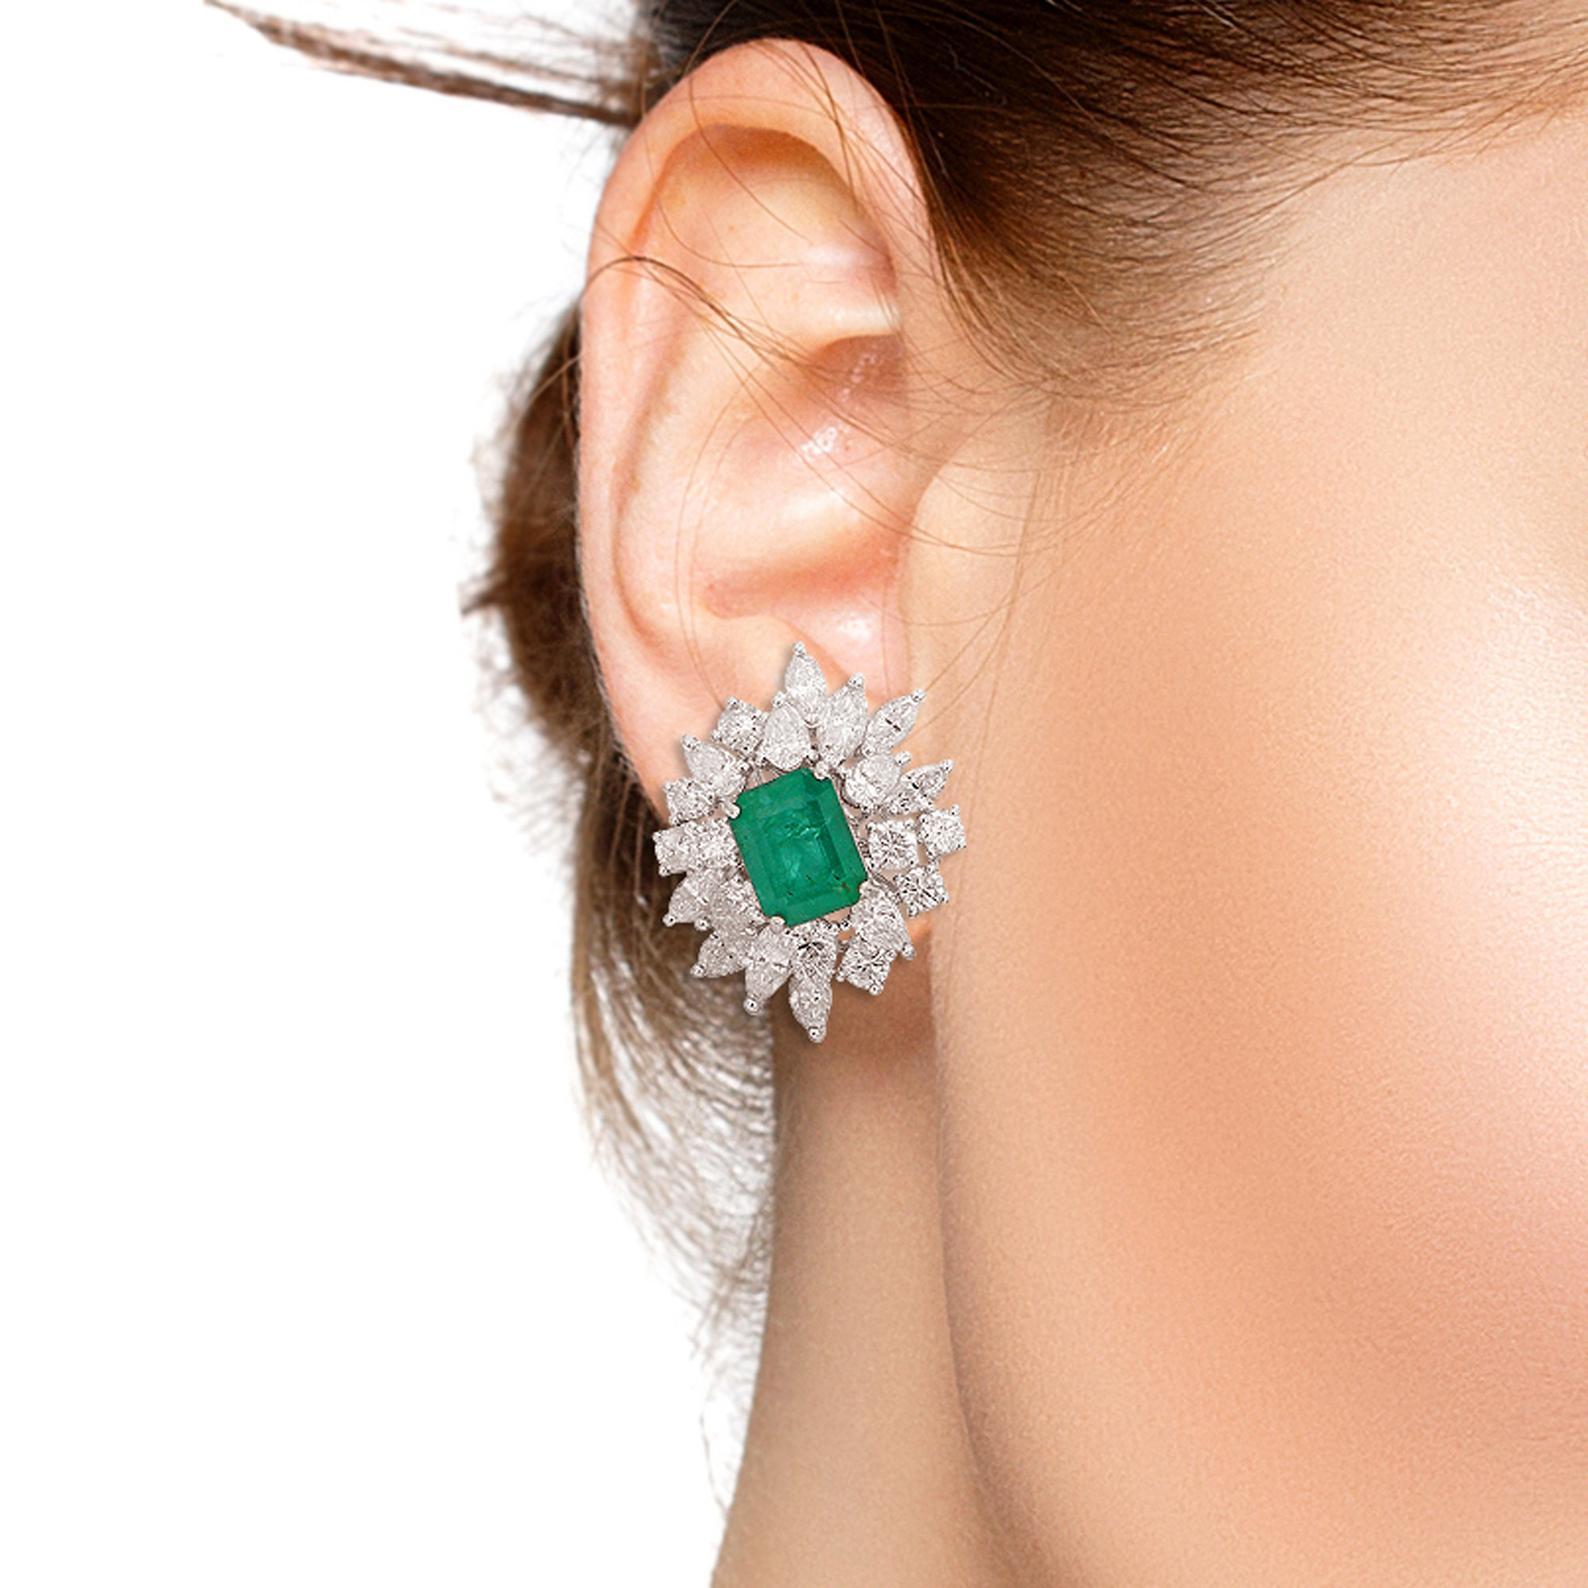 Cast in 14 karat white gold, these stunning stud earrings are hand set with emerald and 5.90 carats of glimmering diamonds. 

FOLLOW MEGHNA JEWELS storefront to view the latest collection & exclusive pieces. Meghna Jewels is proudly rated as a Top